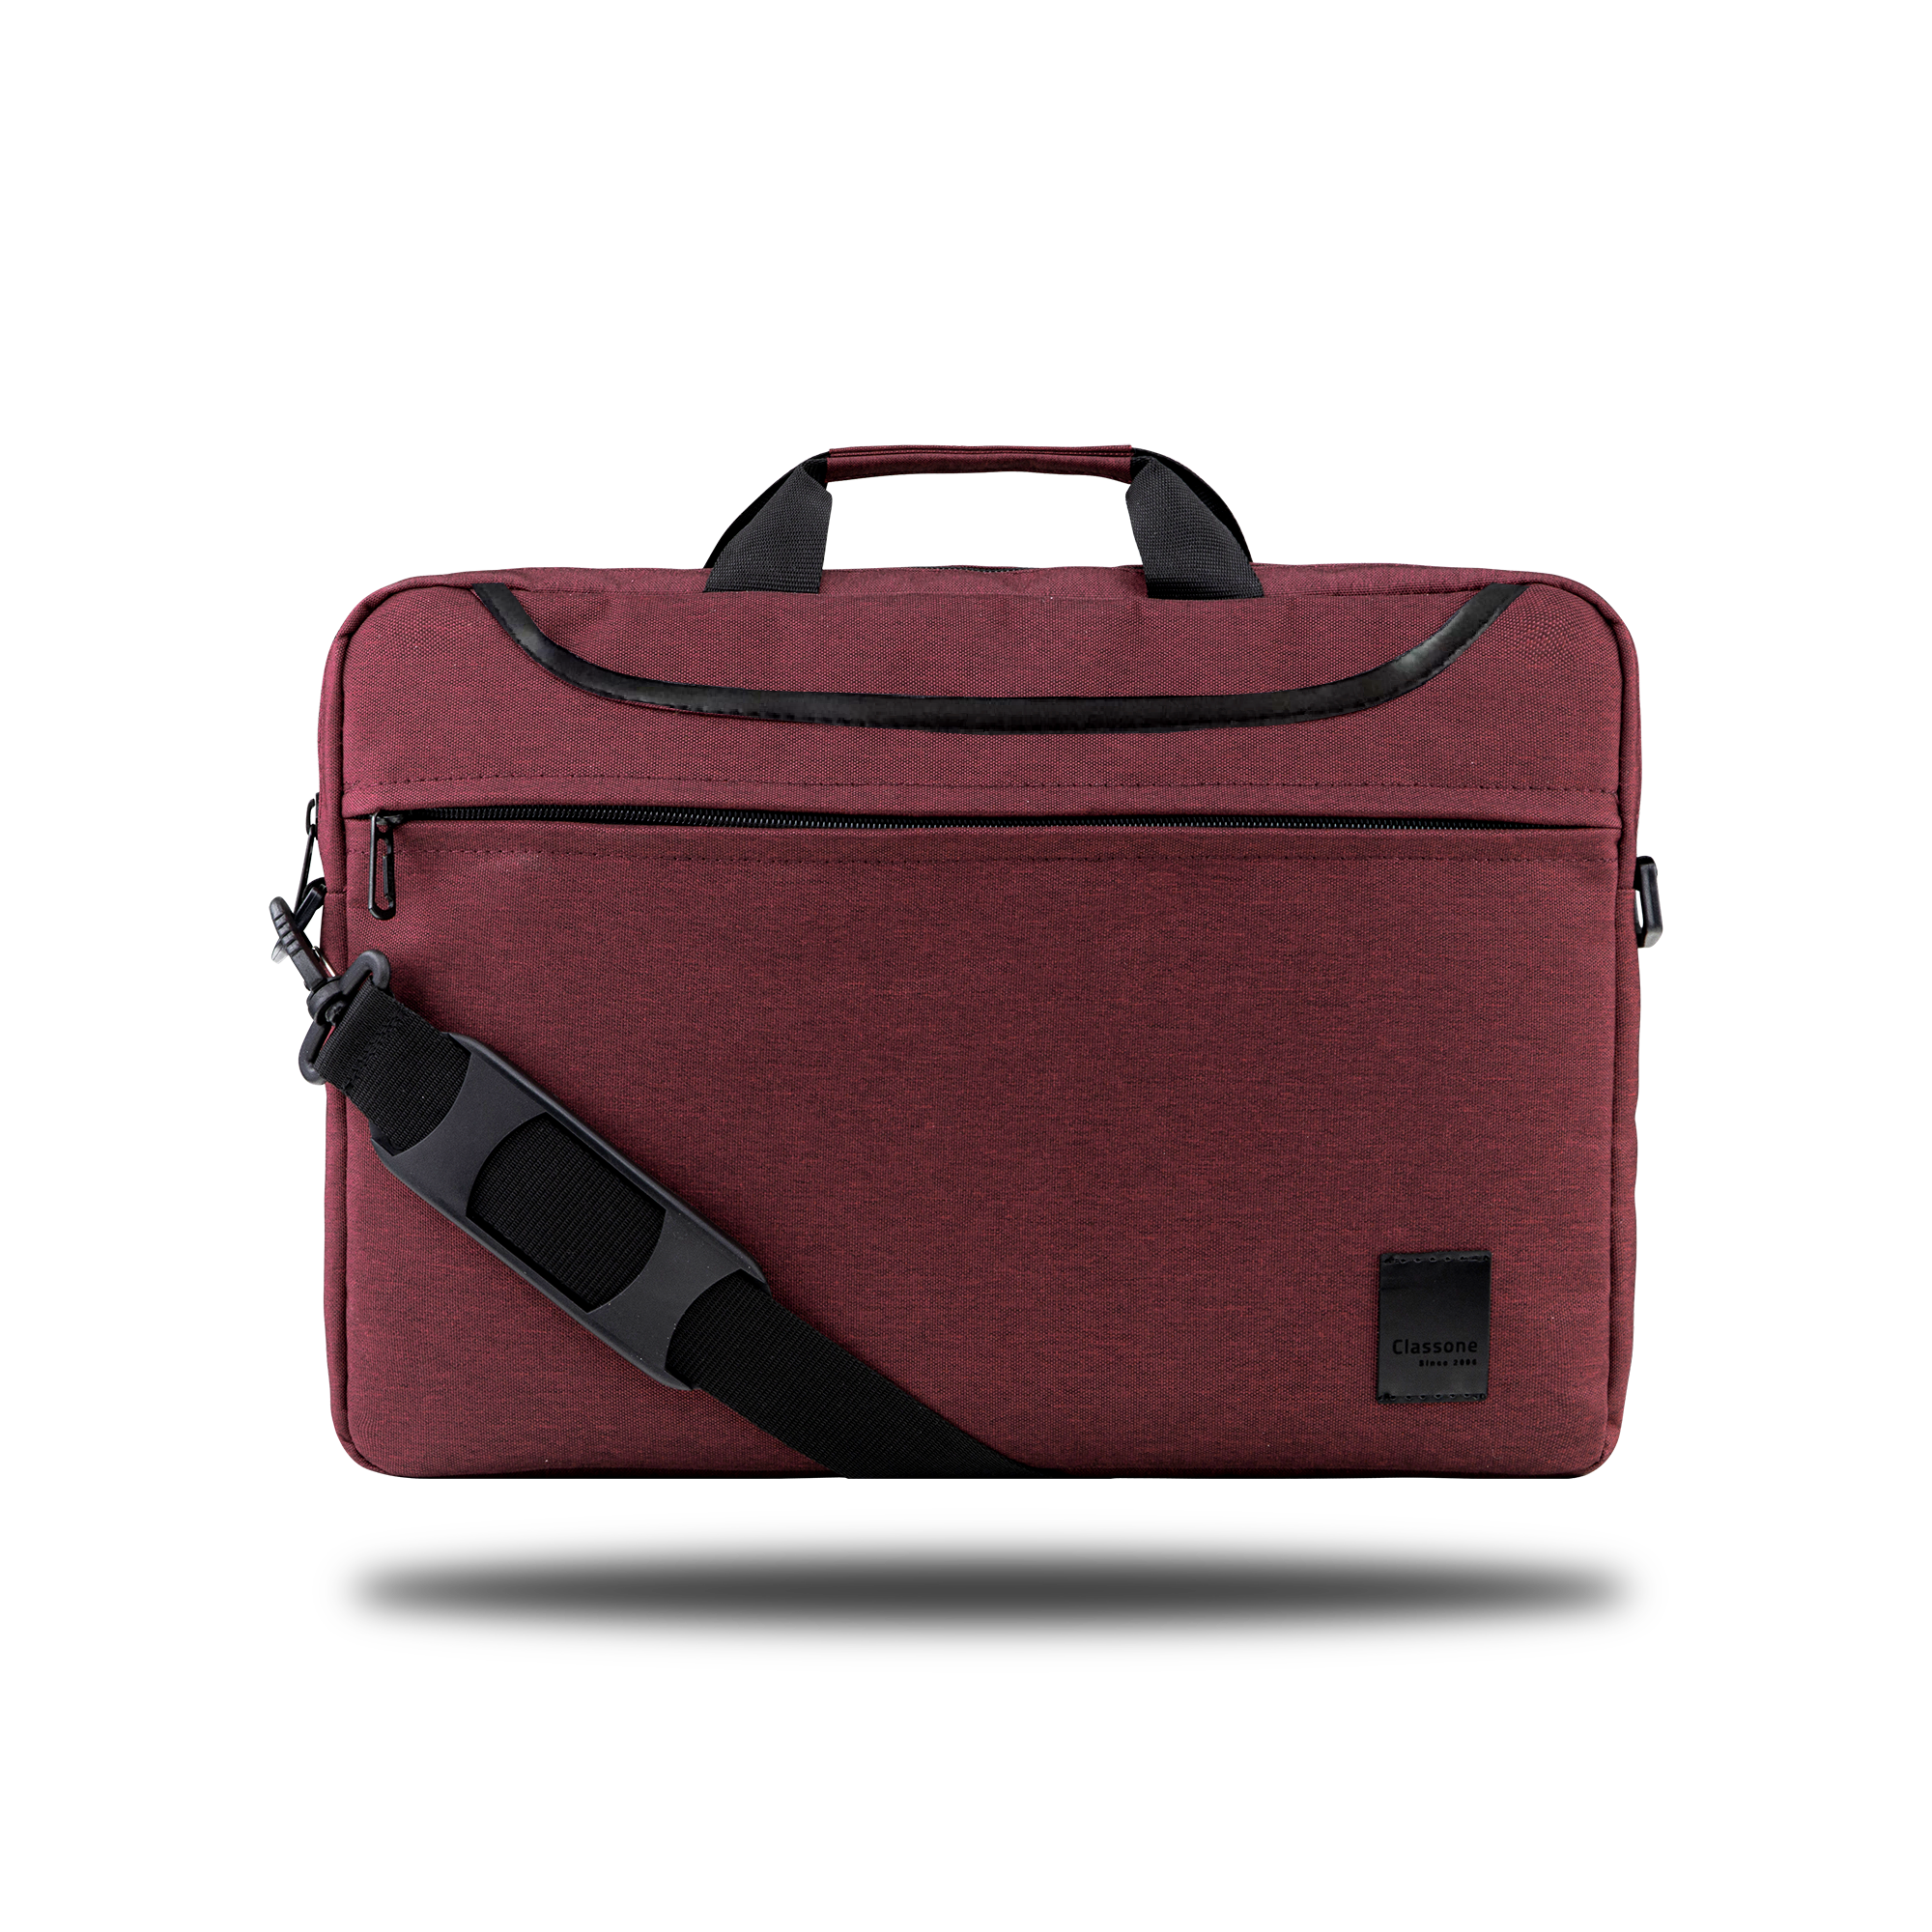 Classone WorkStation2 Series BND505 WTXpro Waterproof Fabric 15.6 " Laptop Bag-Claret Red